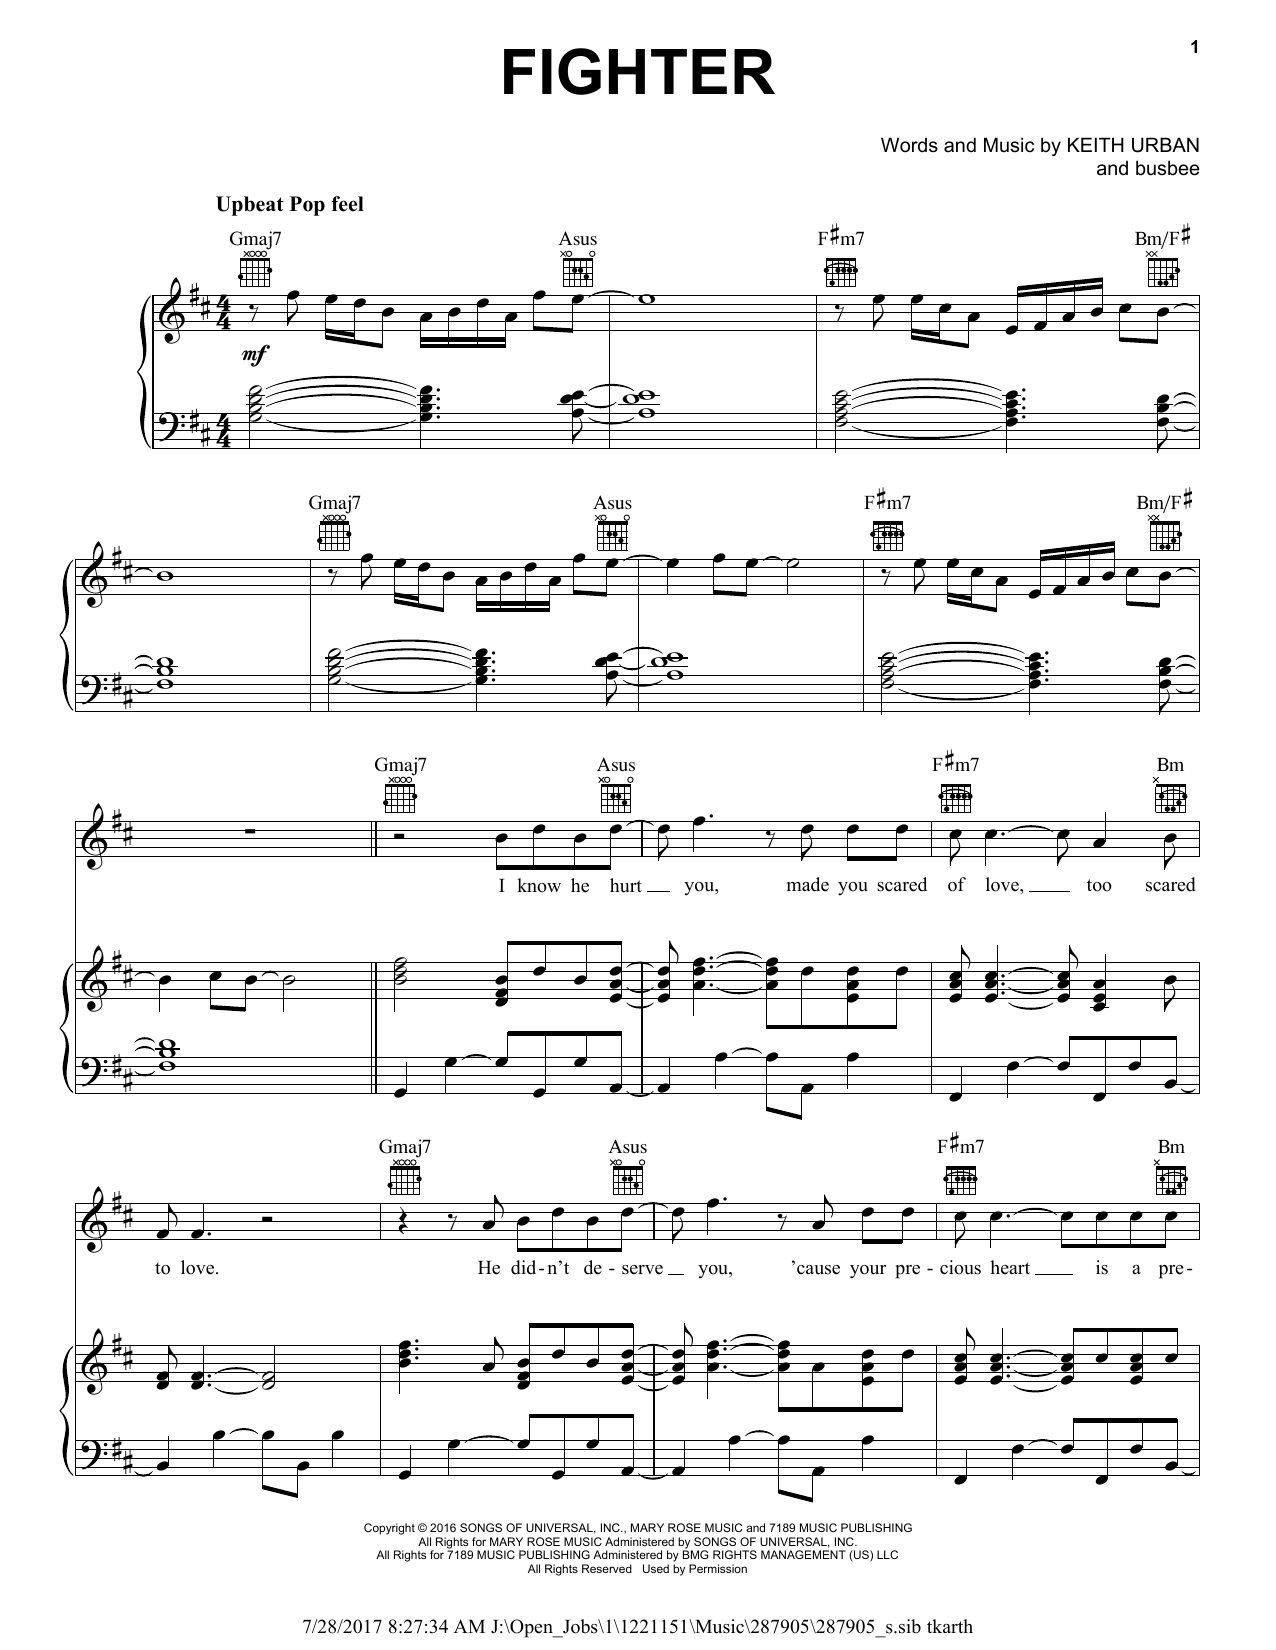 Download Keith Urban feat. Carrie Underwood Fighter Sheet Music